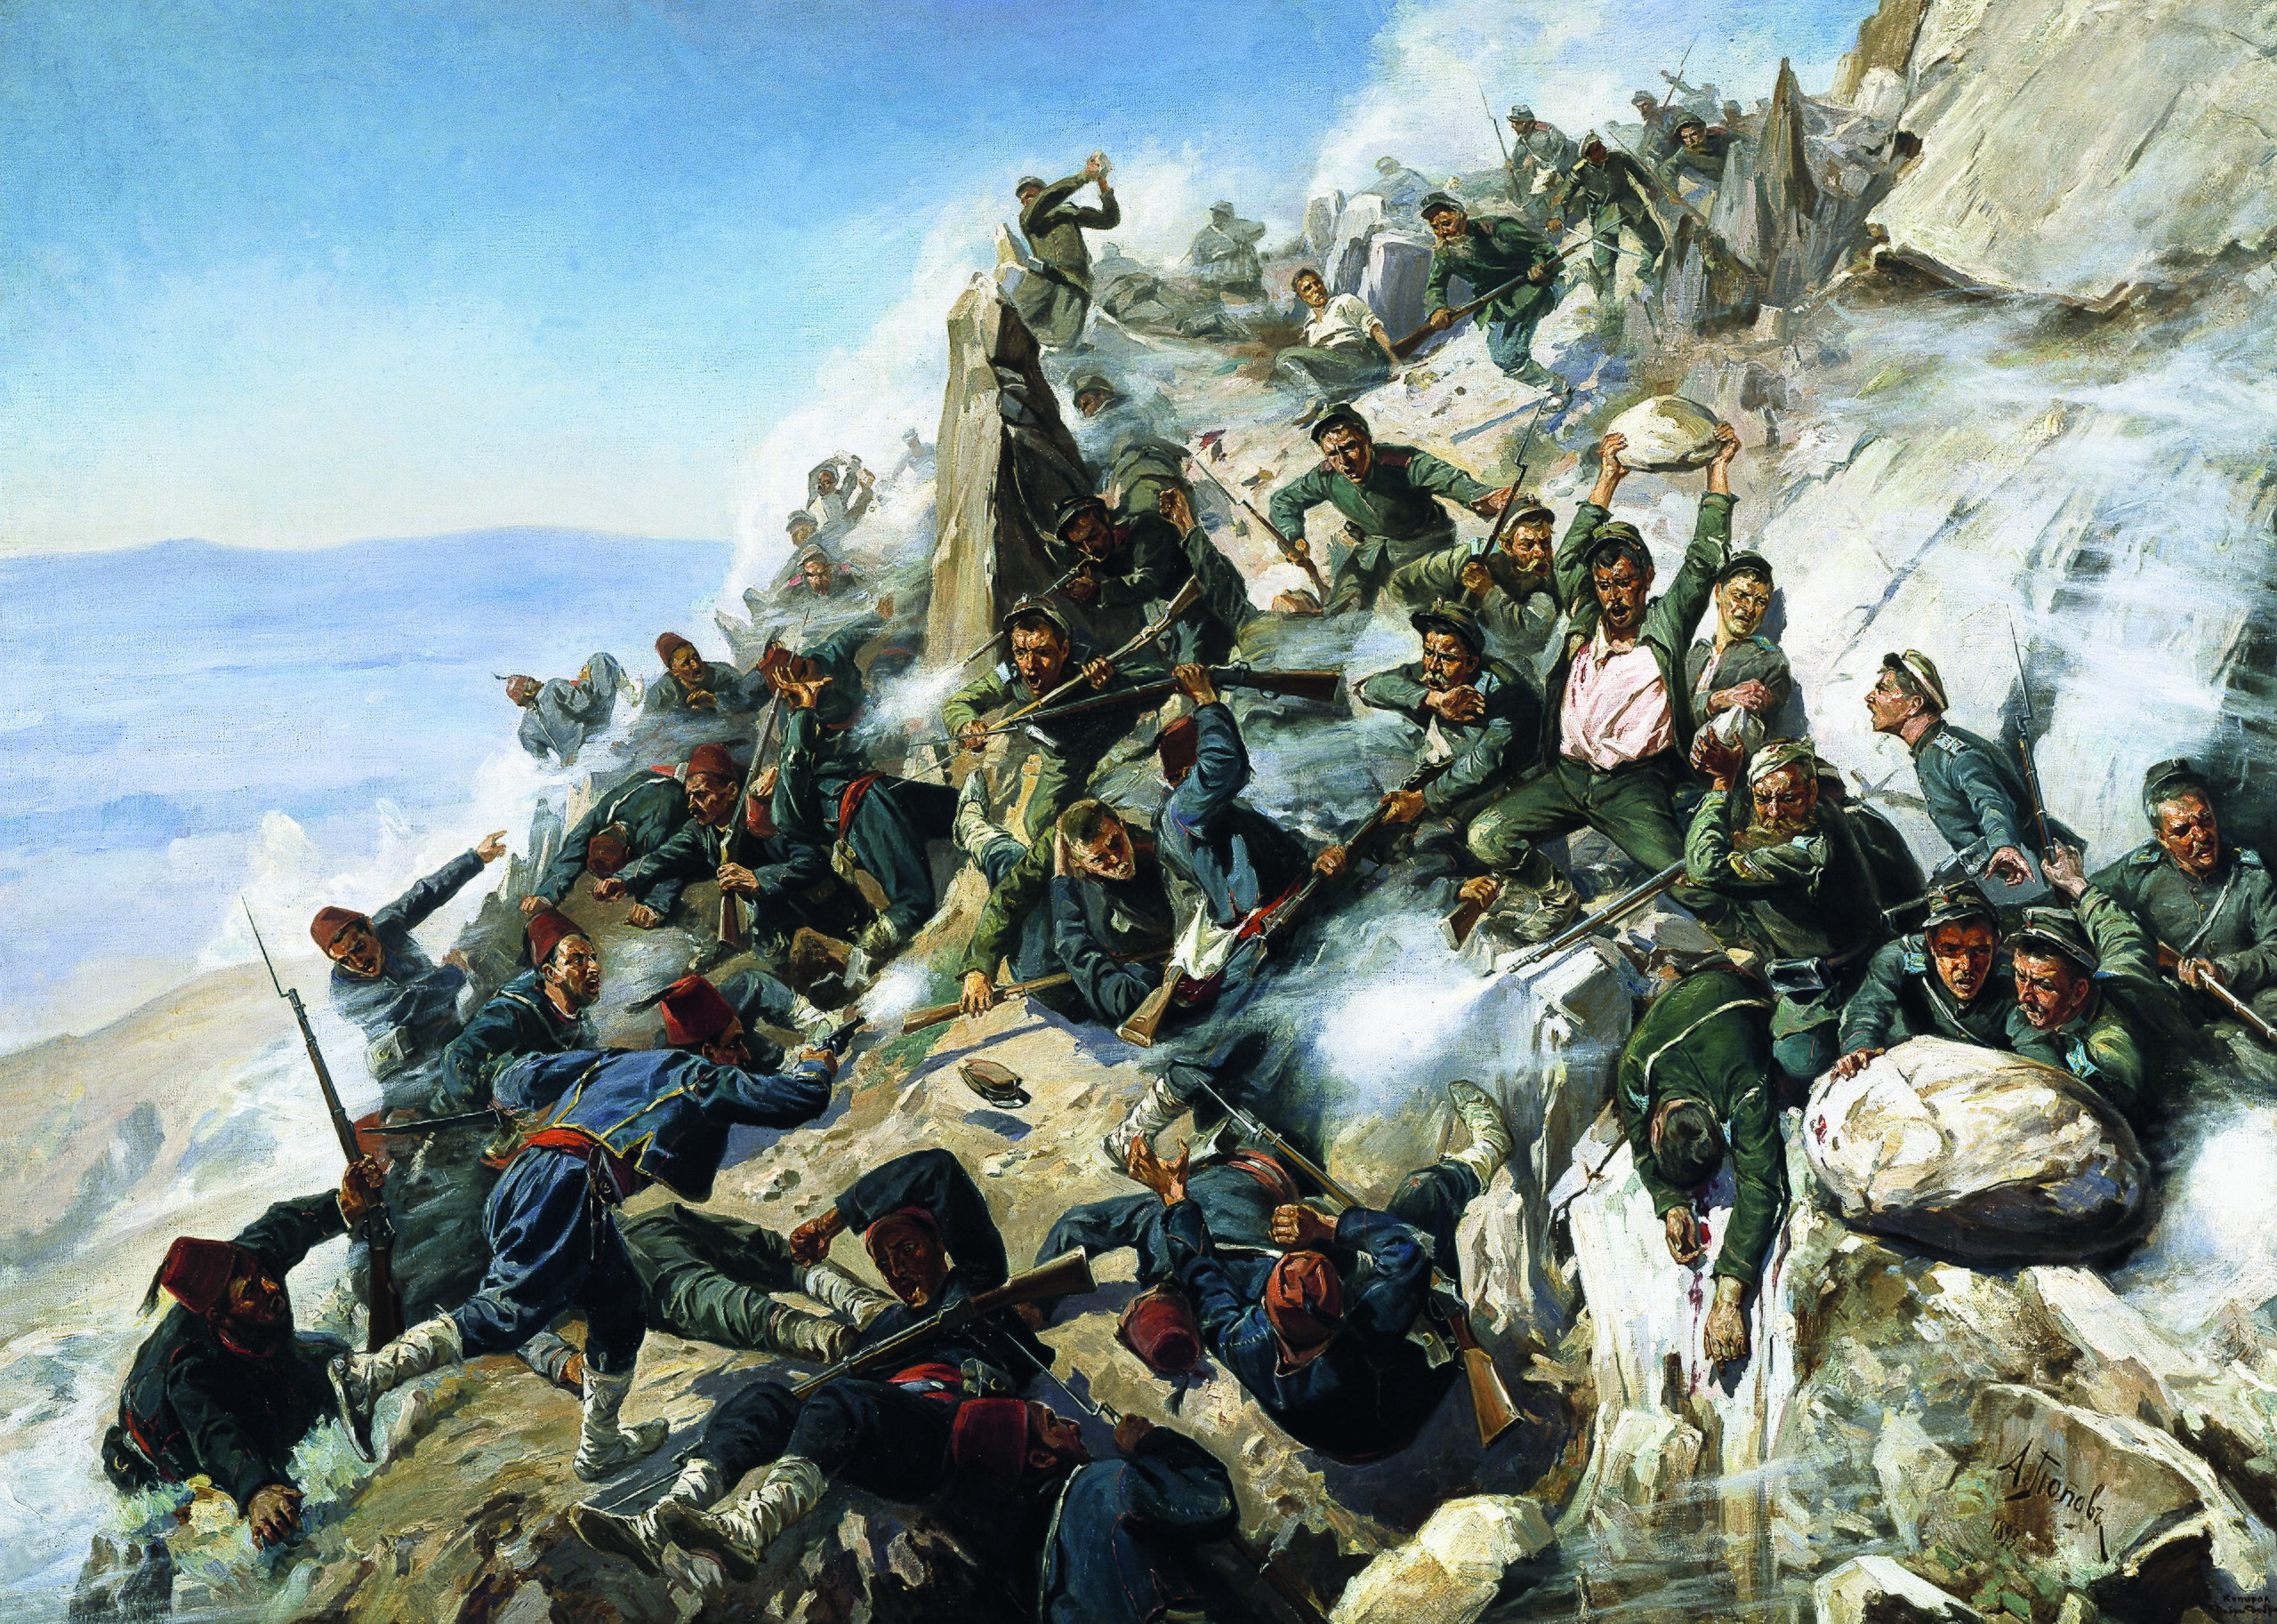 Bulgarian and Russian troops defeat Ottoman forces at the Shipka Peak